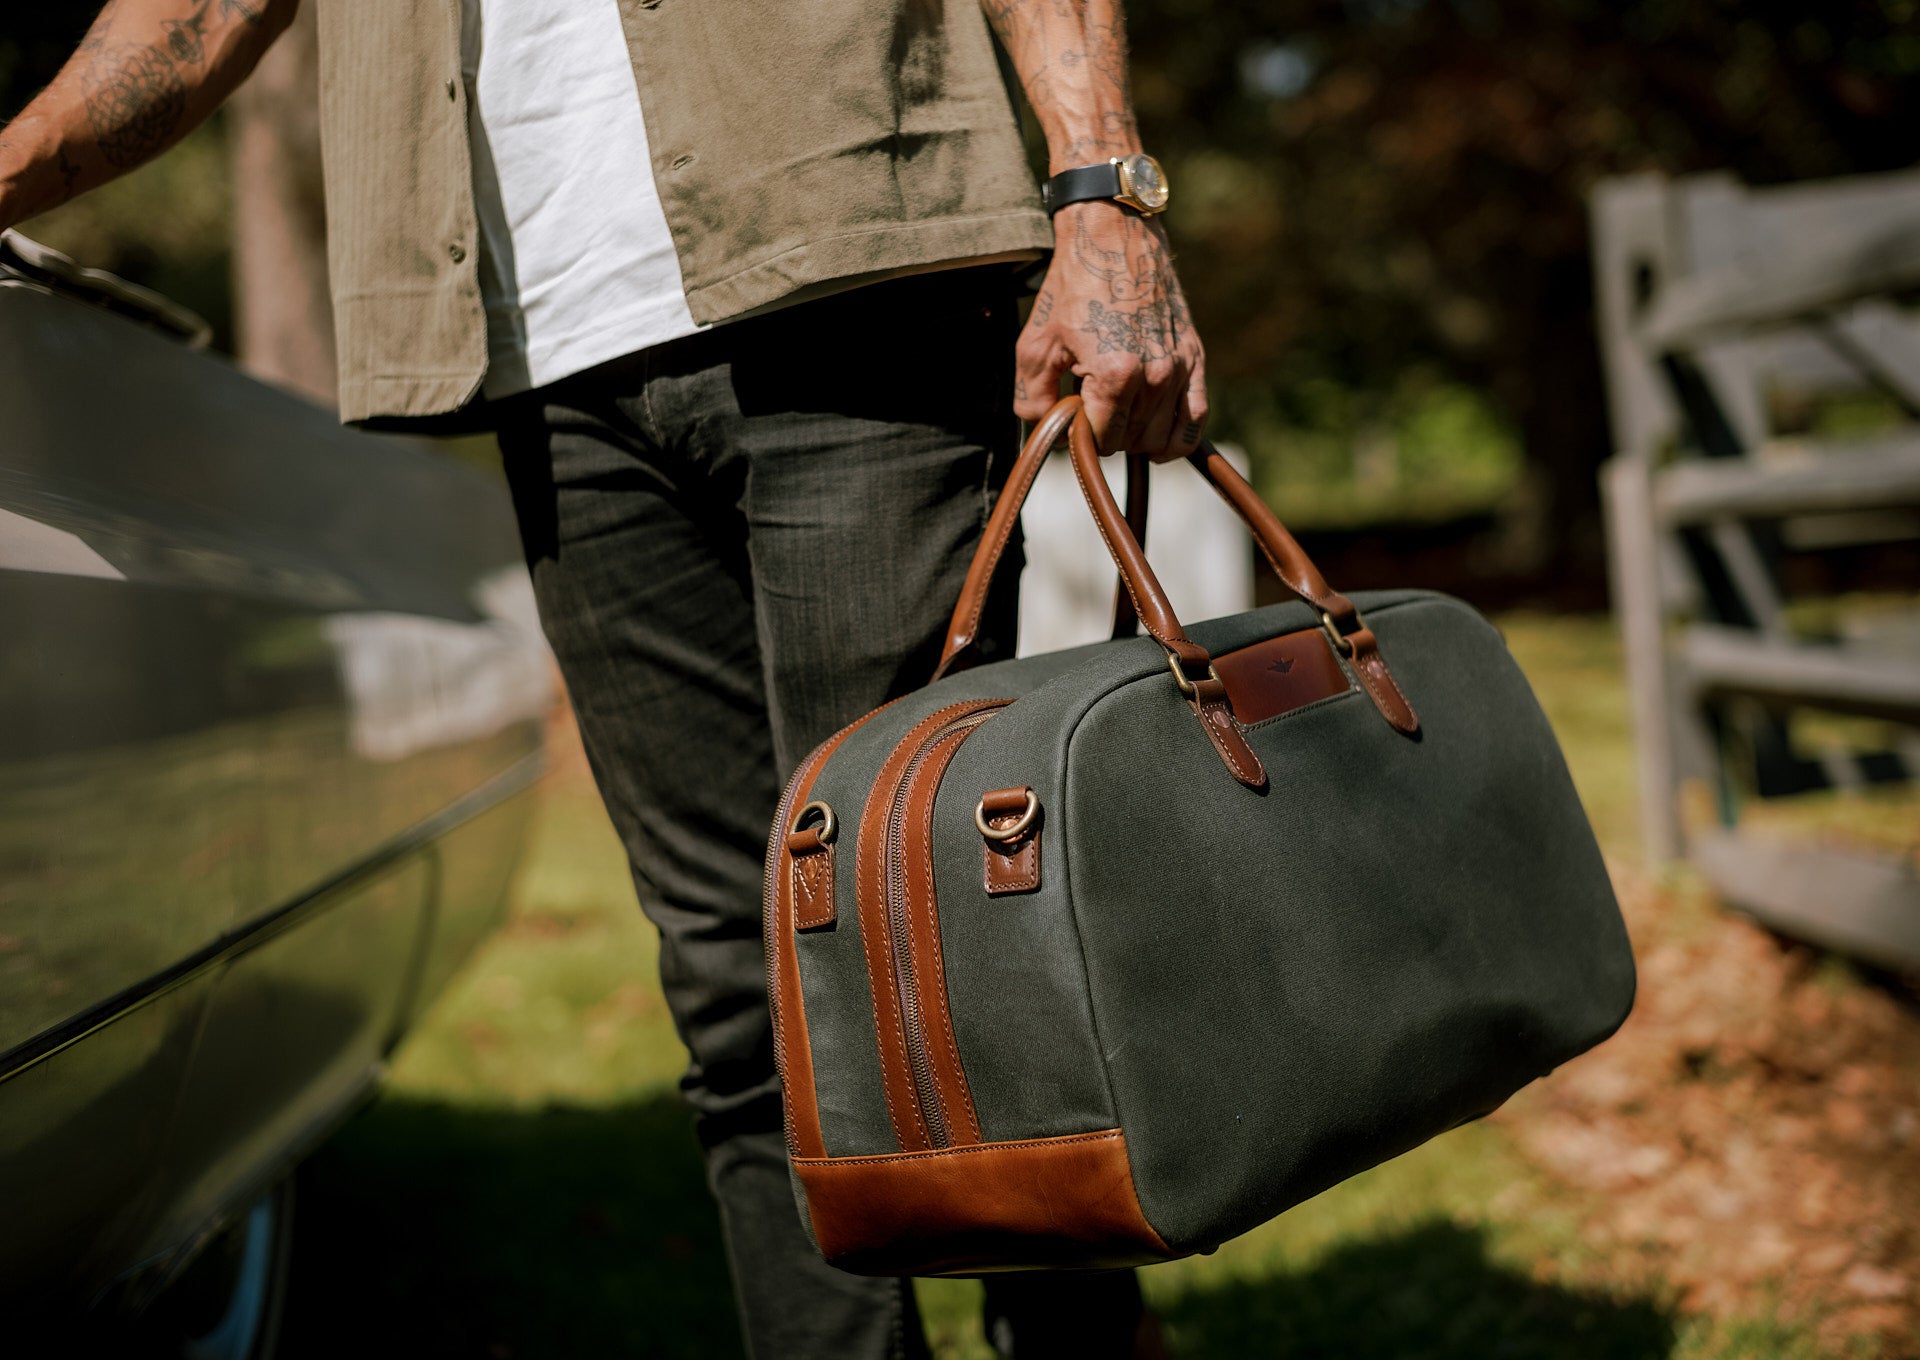 weekender, duffelbag, travel bag in waxed canvas and leather